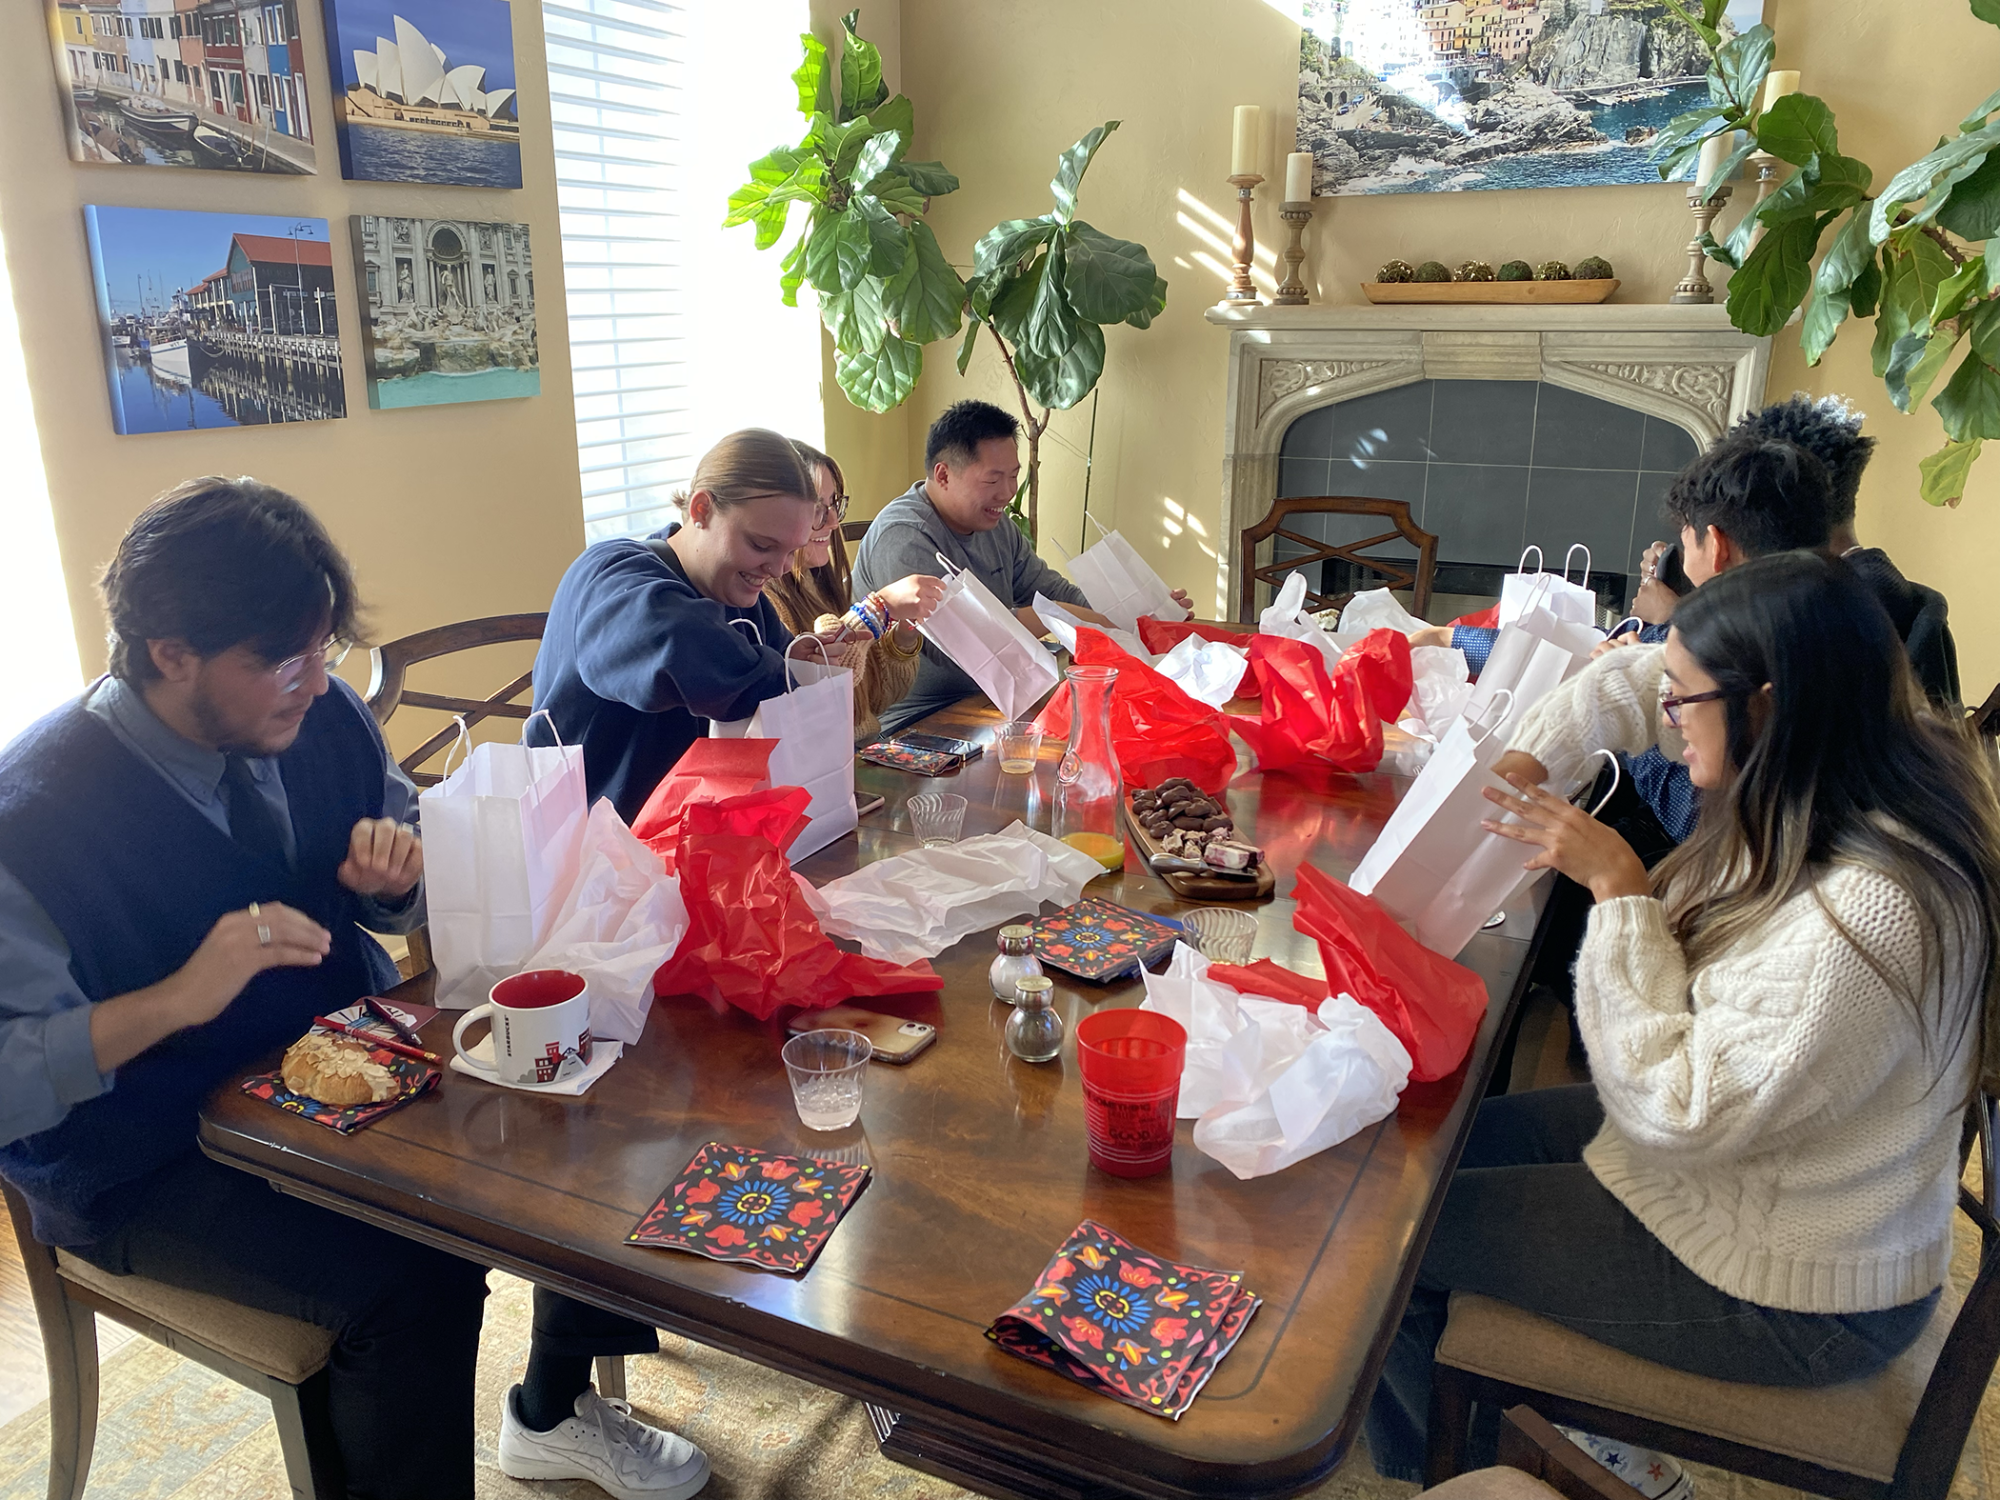 A group of students sitting at a dining room table opening gift bags